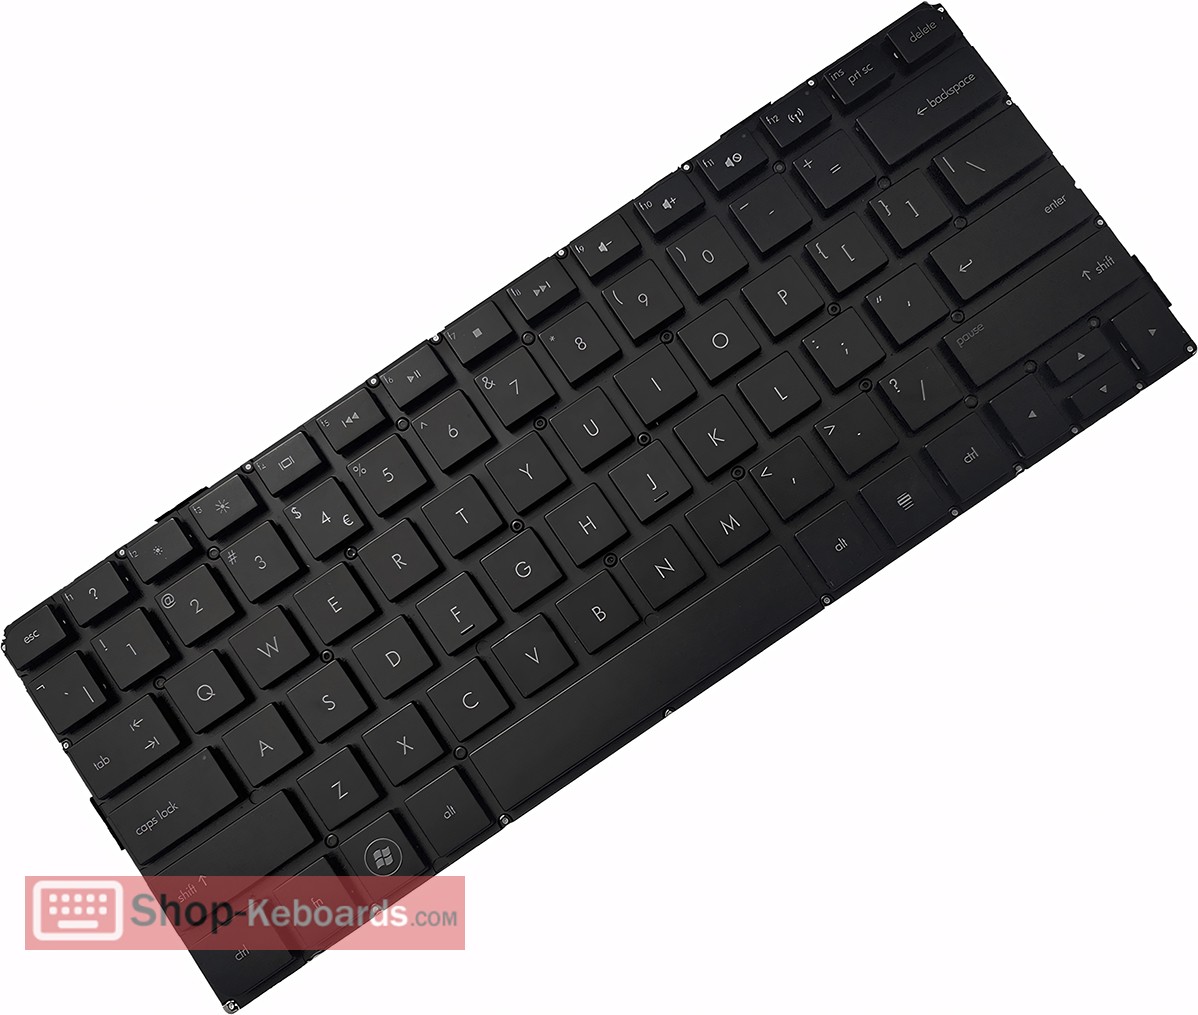 HP ENVY 13-1050 SERIES Keyboard replacement